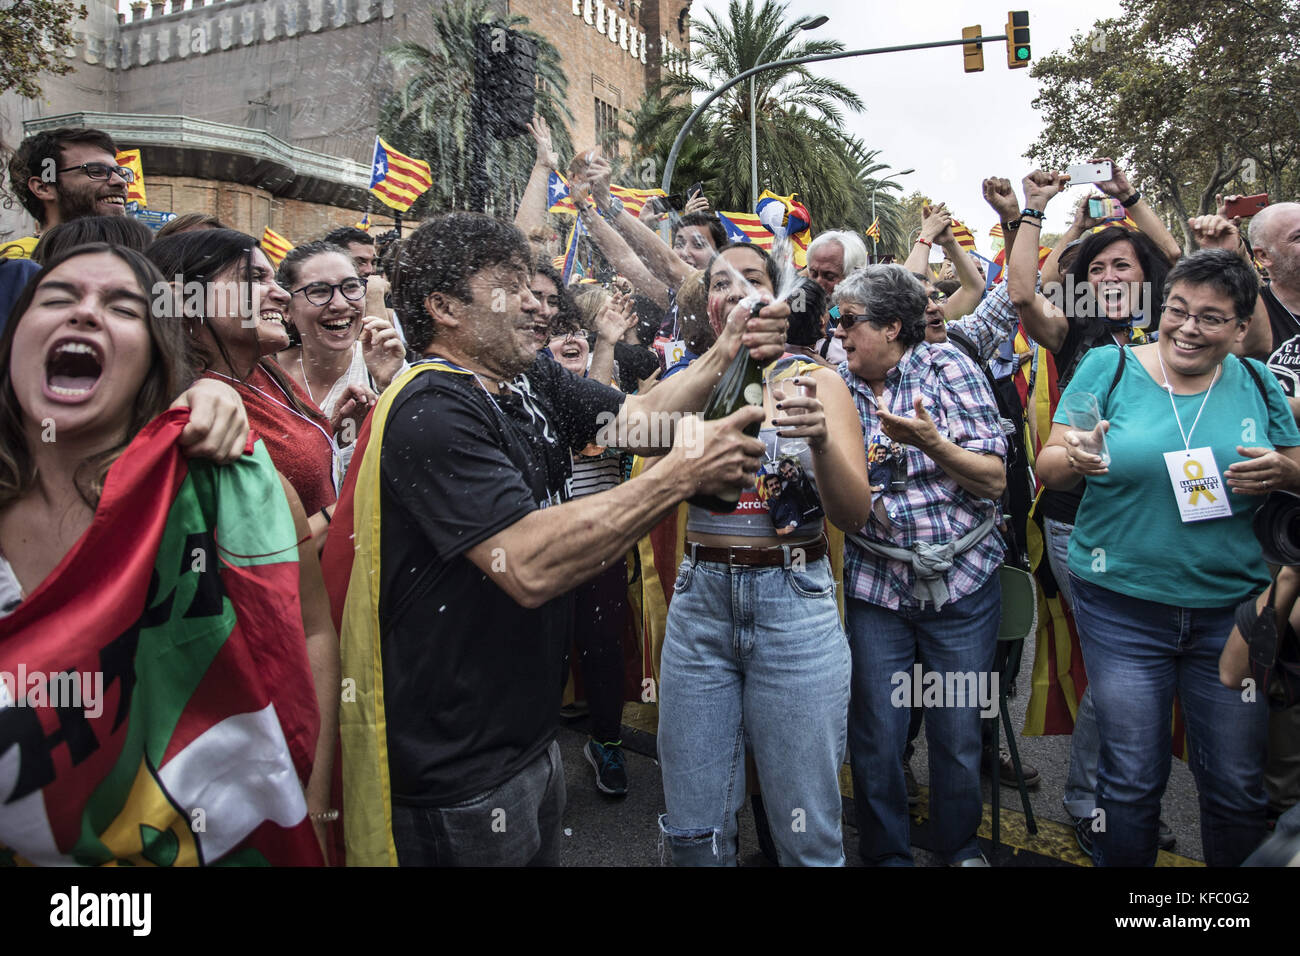 Barcelona, Barcelona, Spain. 27th Oct, 2017. Pro independence supporters seen celebrating.Tens of thousands of people have gathered today in support to the statement of independence of the Catalan Republic around the Parliament. After the statement, the people have celebrated it for the streets, between tears of happiness. Credit: Victor Serri/SOPA/ZUMA Wire/Alamy Live News Stock Photo